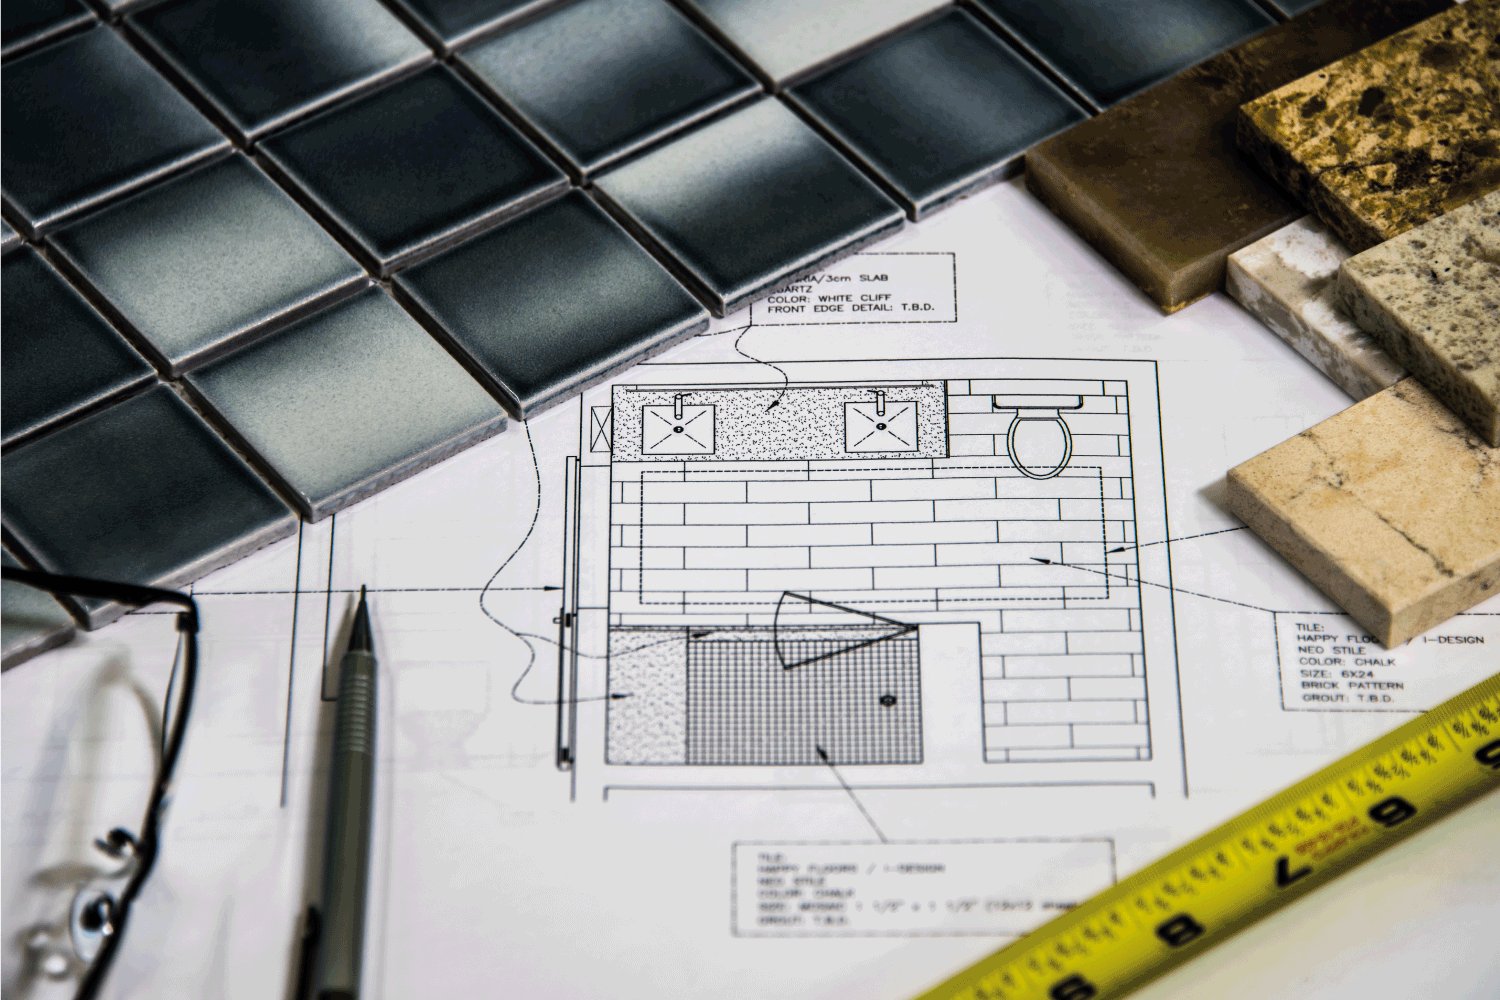 plan and layout of tile pattern of a bathroom